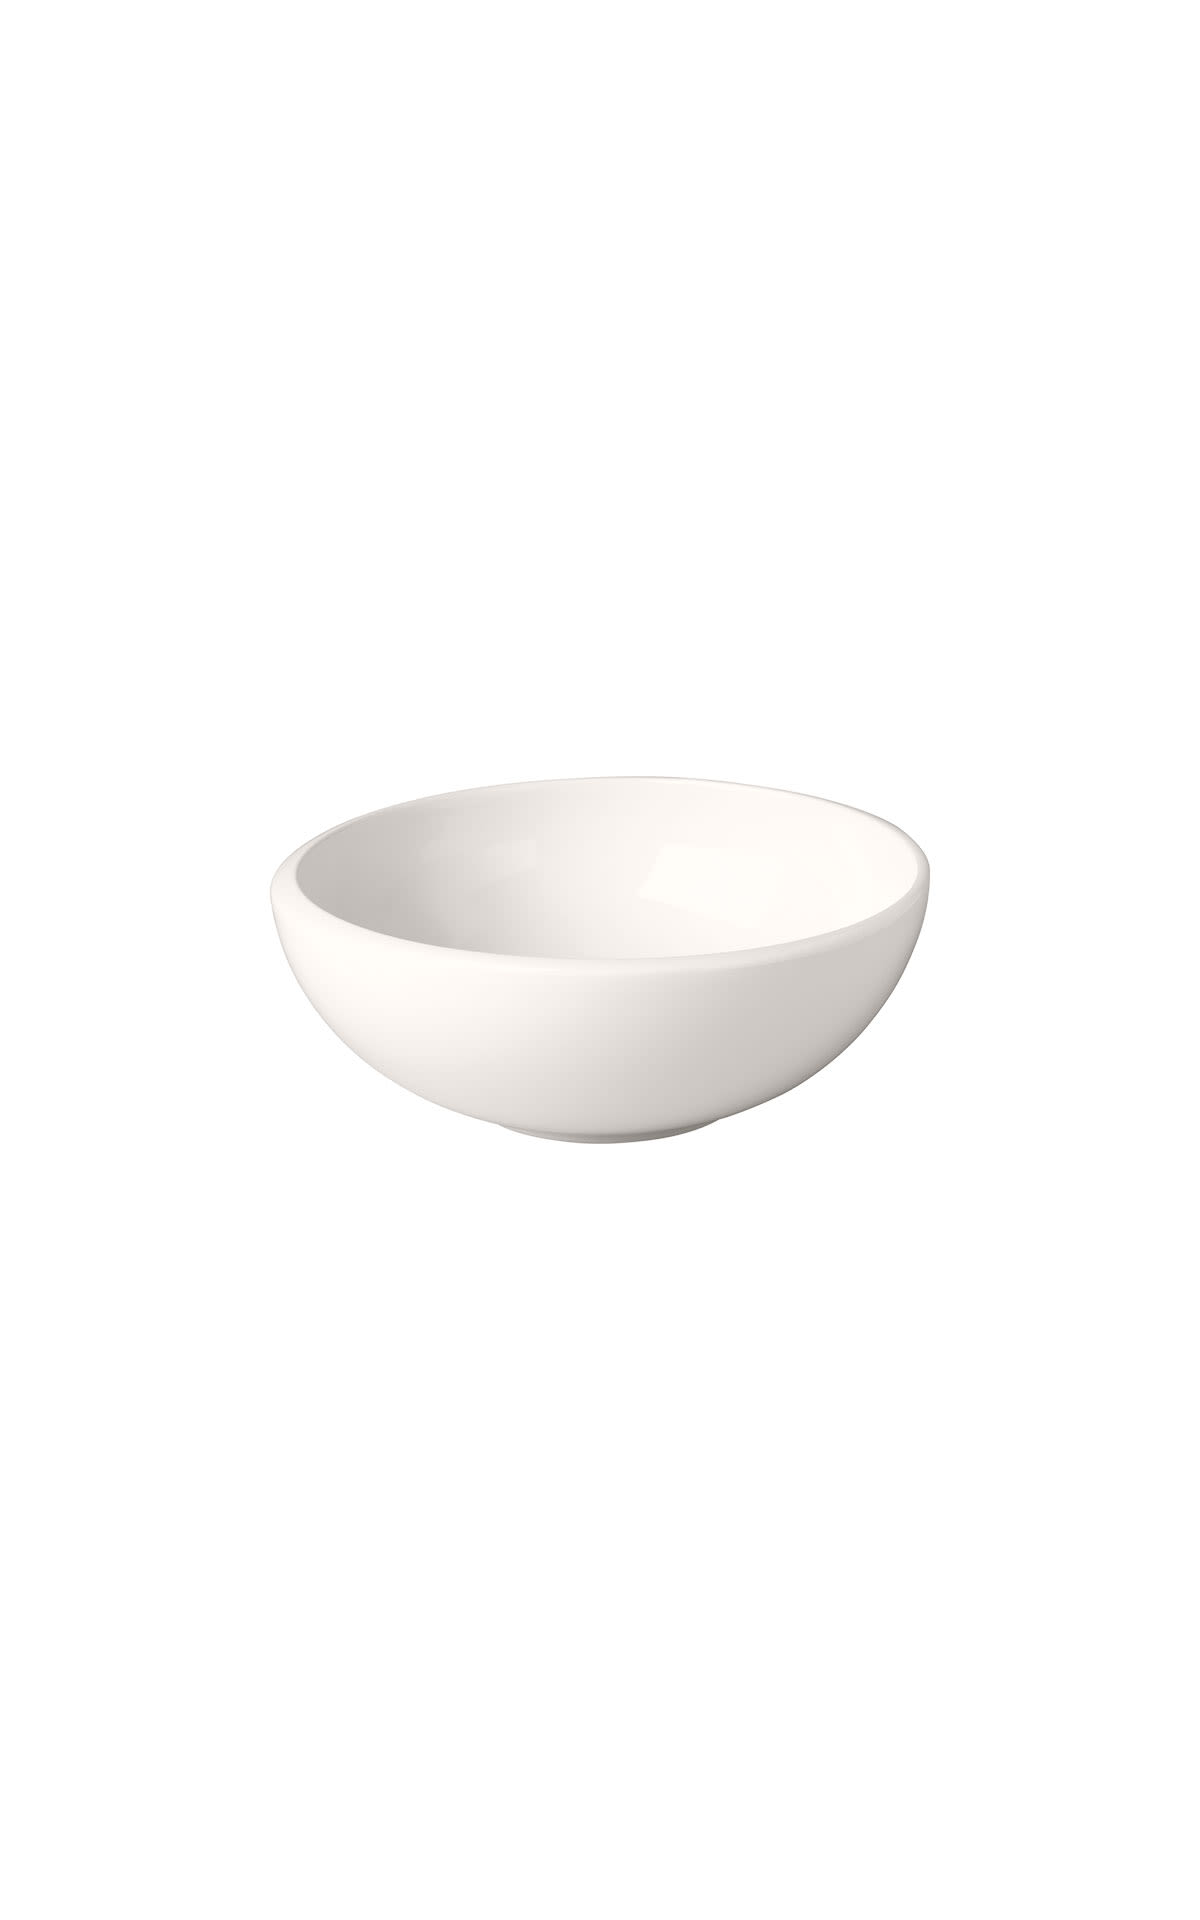 Villeroy & Boch New moon small bowl from Bicester Village